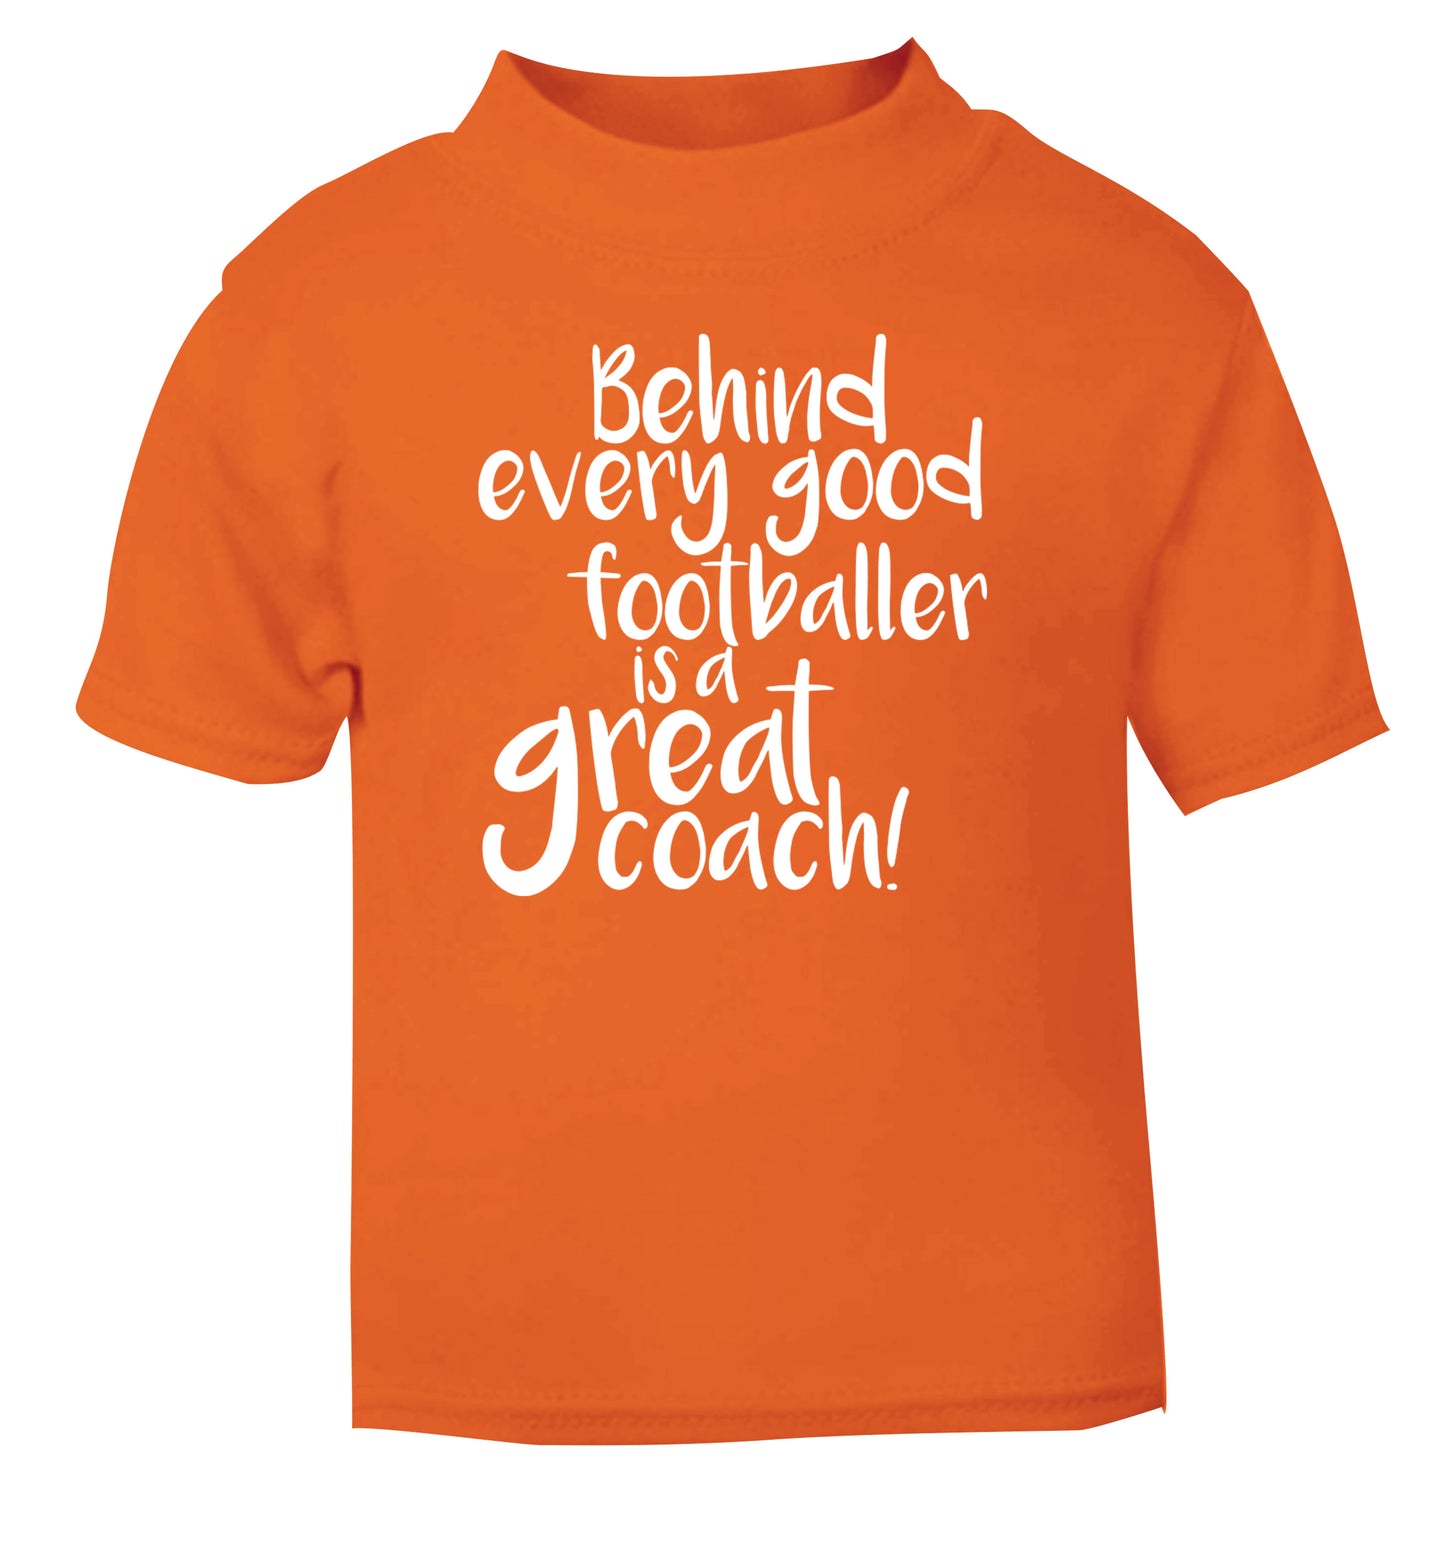 Behind every good footballer is a great coach! orange Baby Toddler Tshirt 2 Years